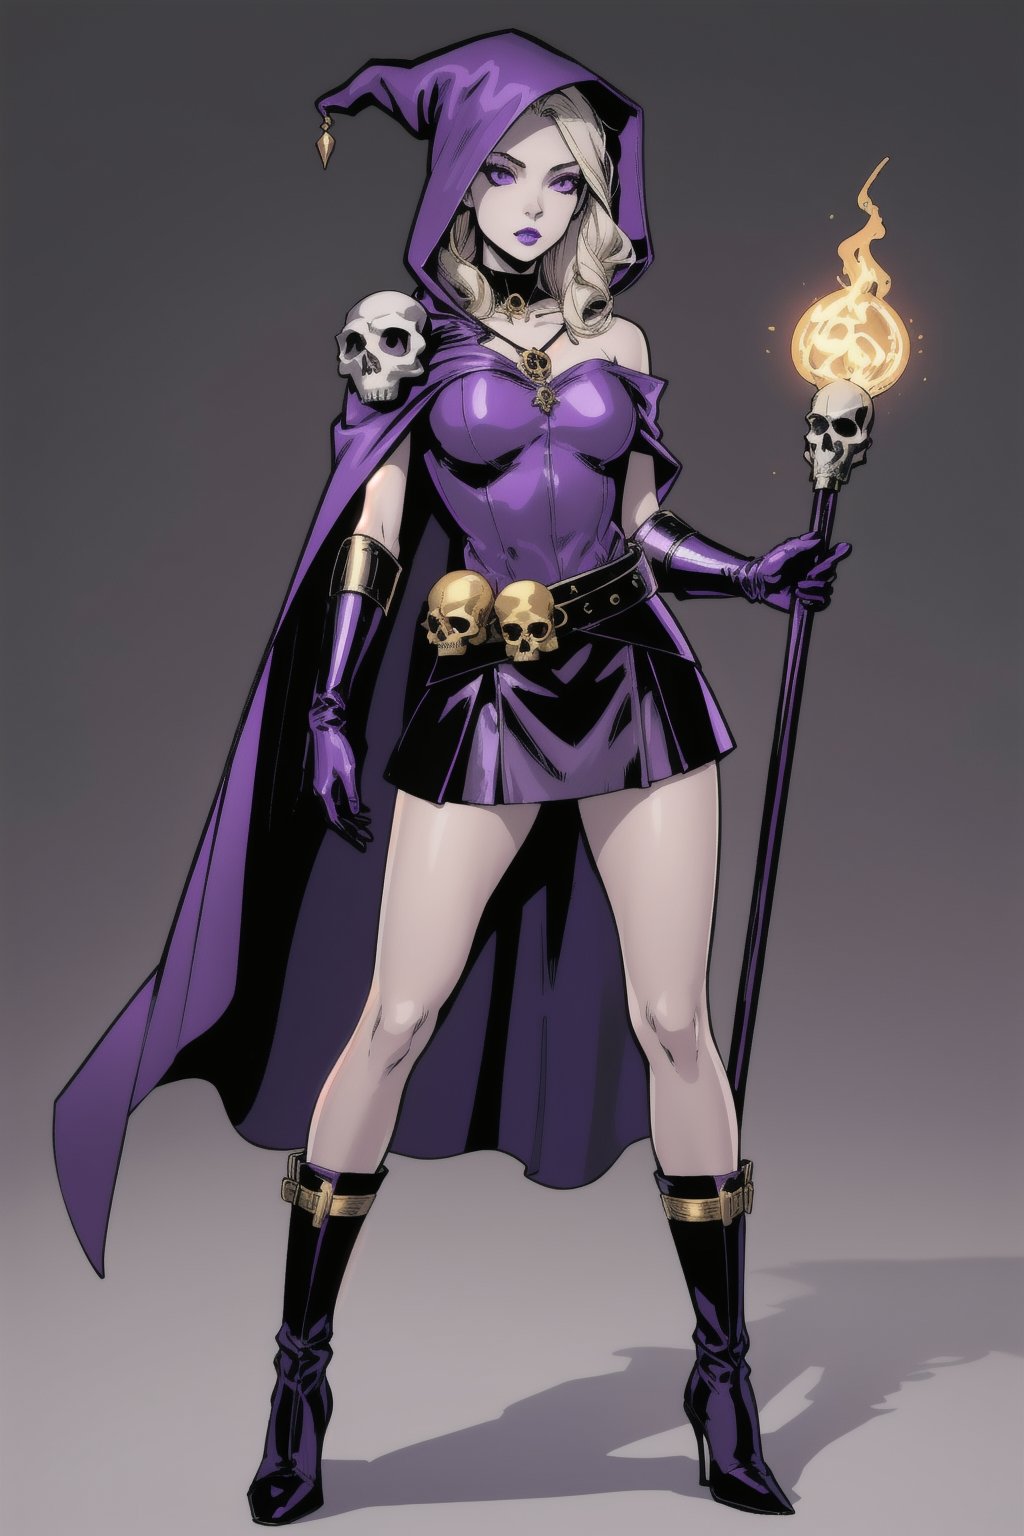 a woman witch costume, (perfect face), pale skin, full purple eyes, blank background, highly detailed, full body, metallic top, metallic gloves, long ripped skirt, comic style, holding skull staff, golden skull belt, skull shoulder pad, purple hooded cape